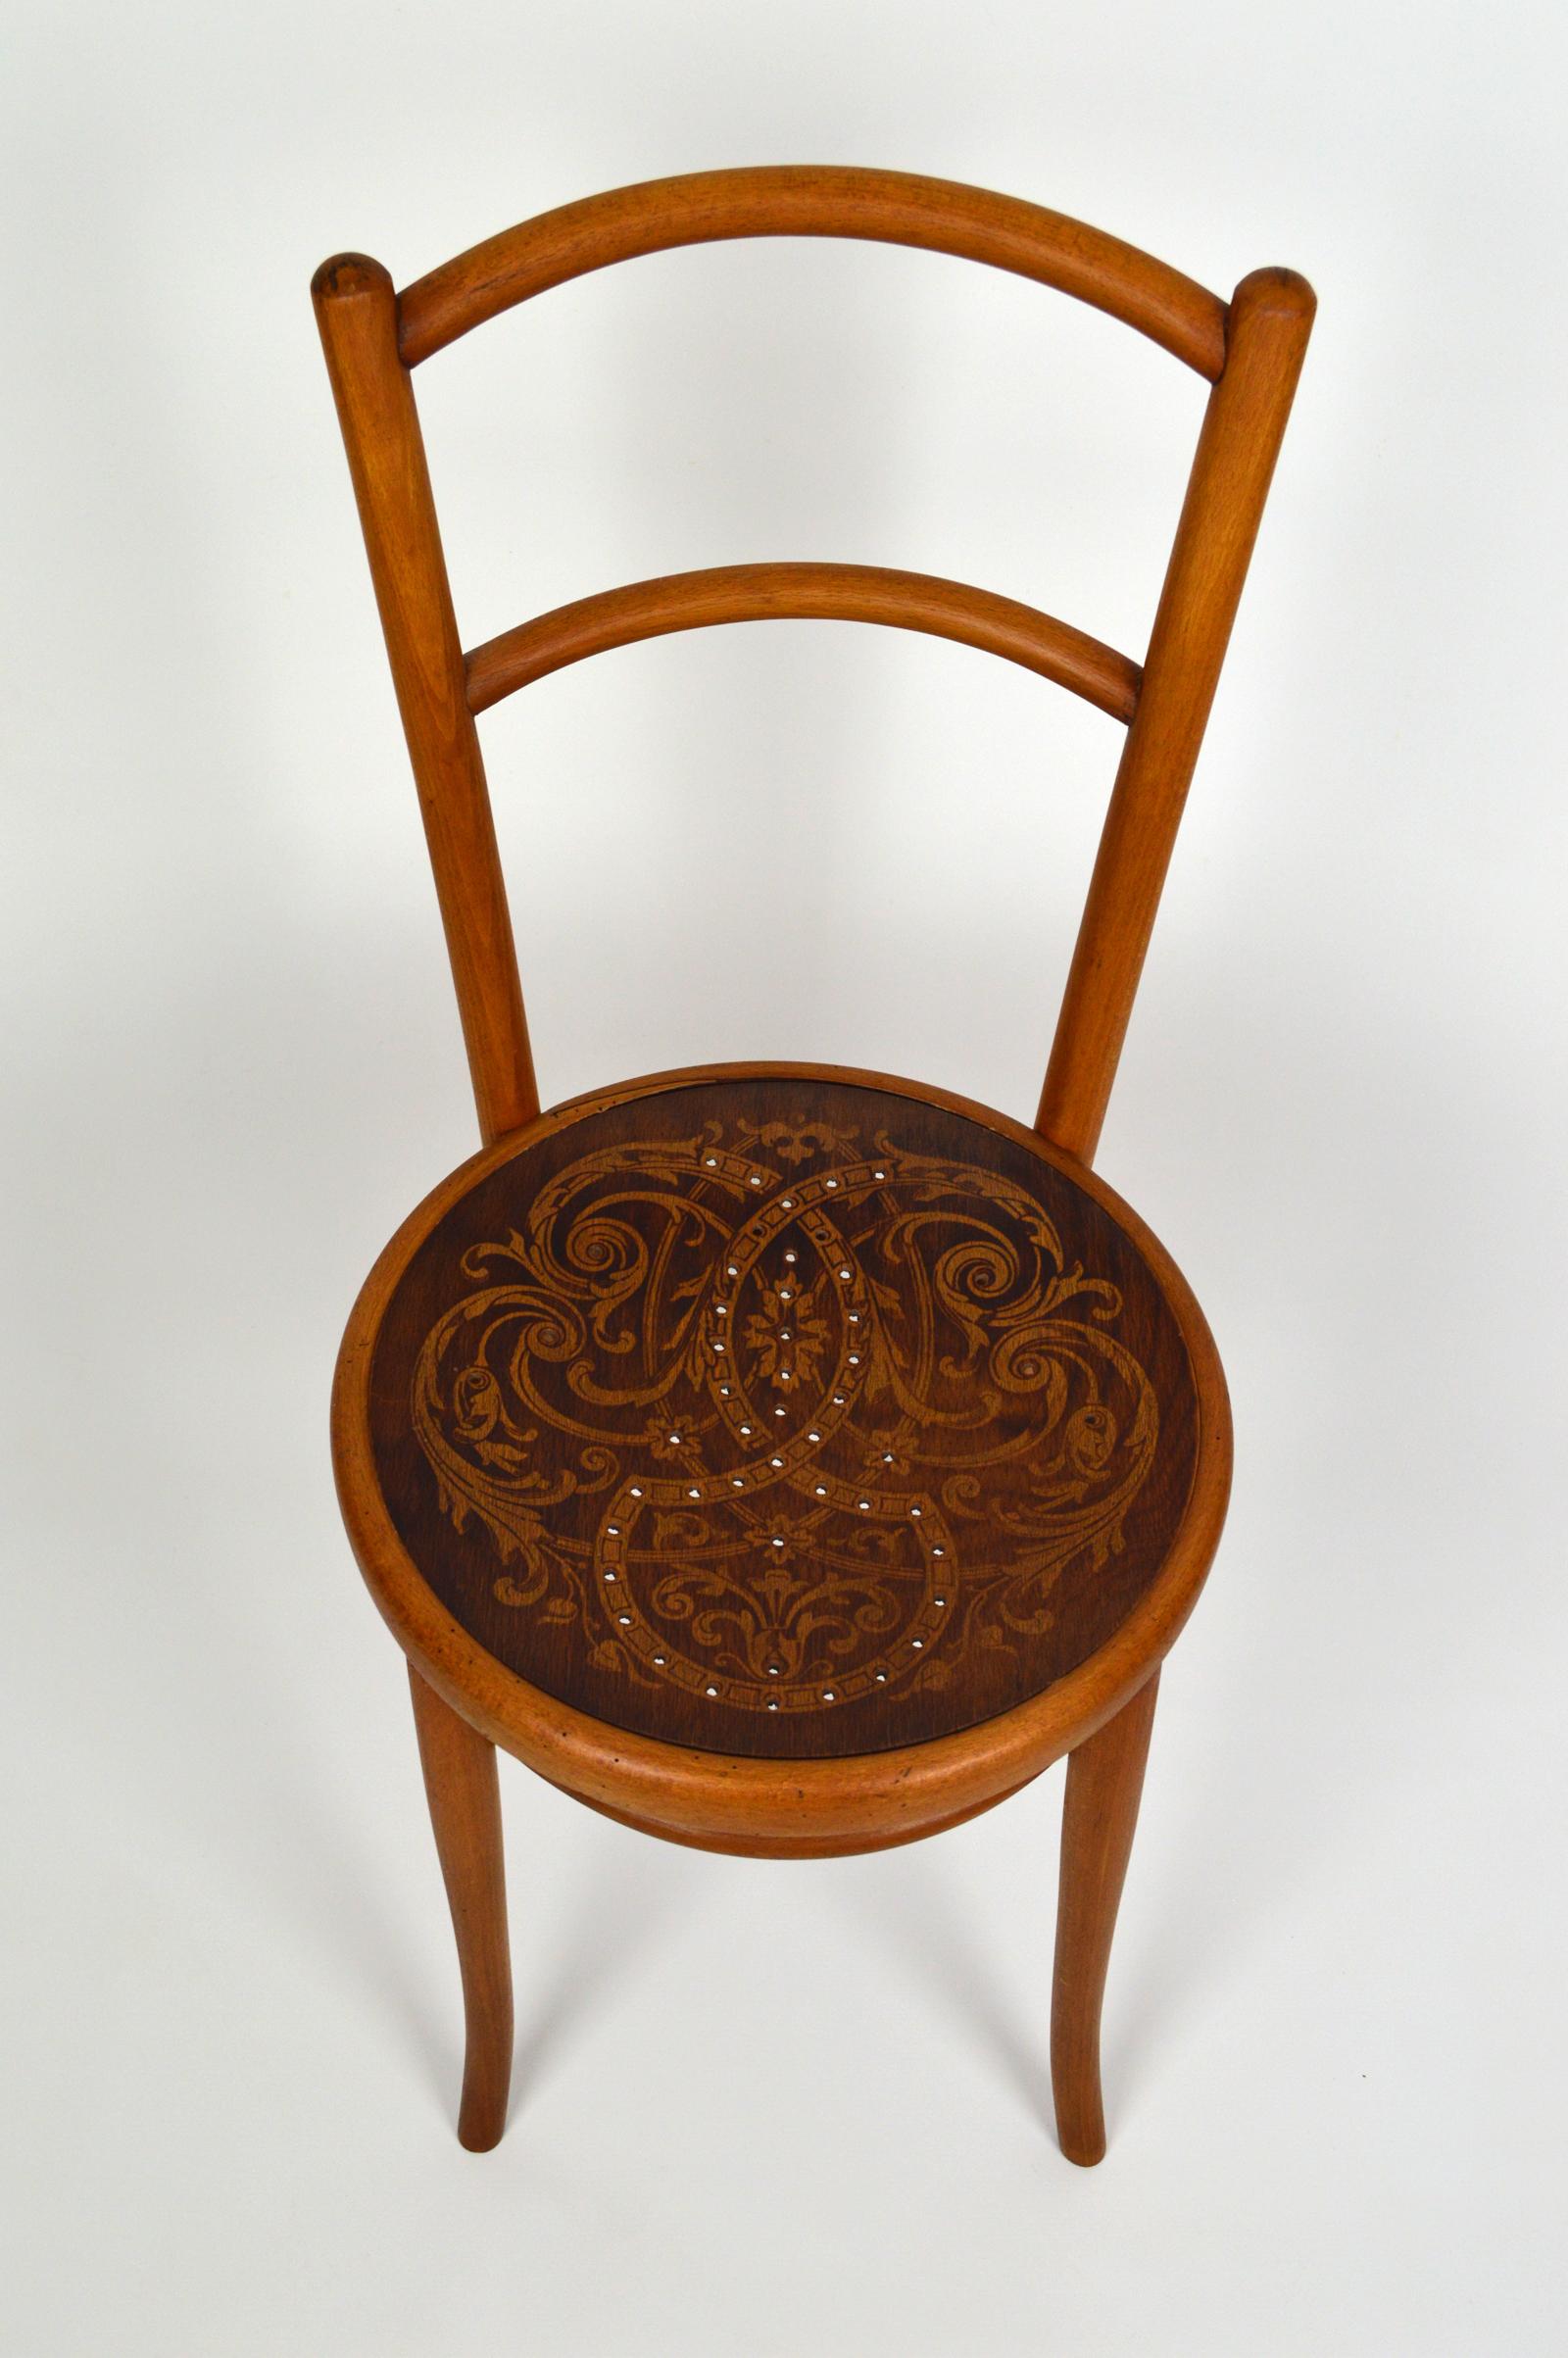 Early 20th Century Austrian Art Nouveau Bentwood Chair with Patterned Seat, J. & J. Kohn, 1900s For Sale